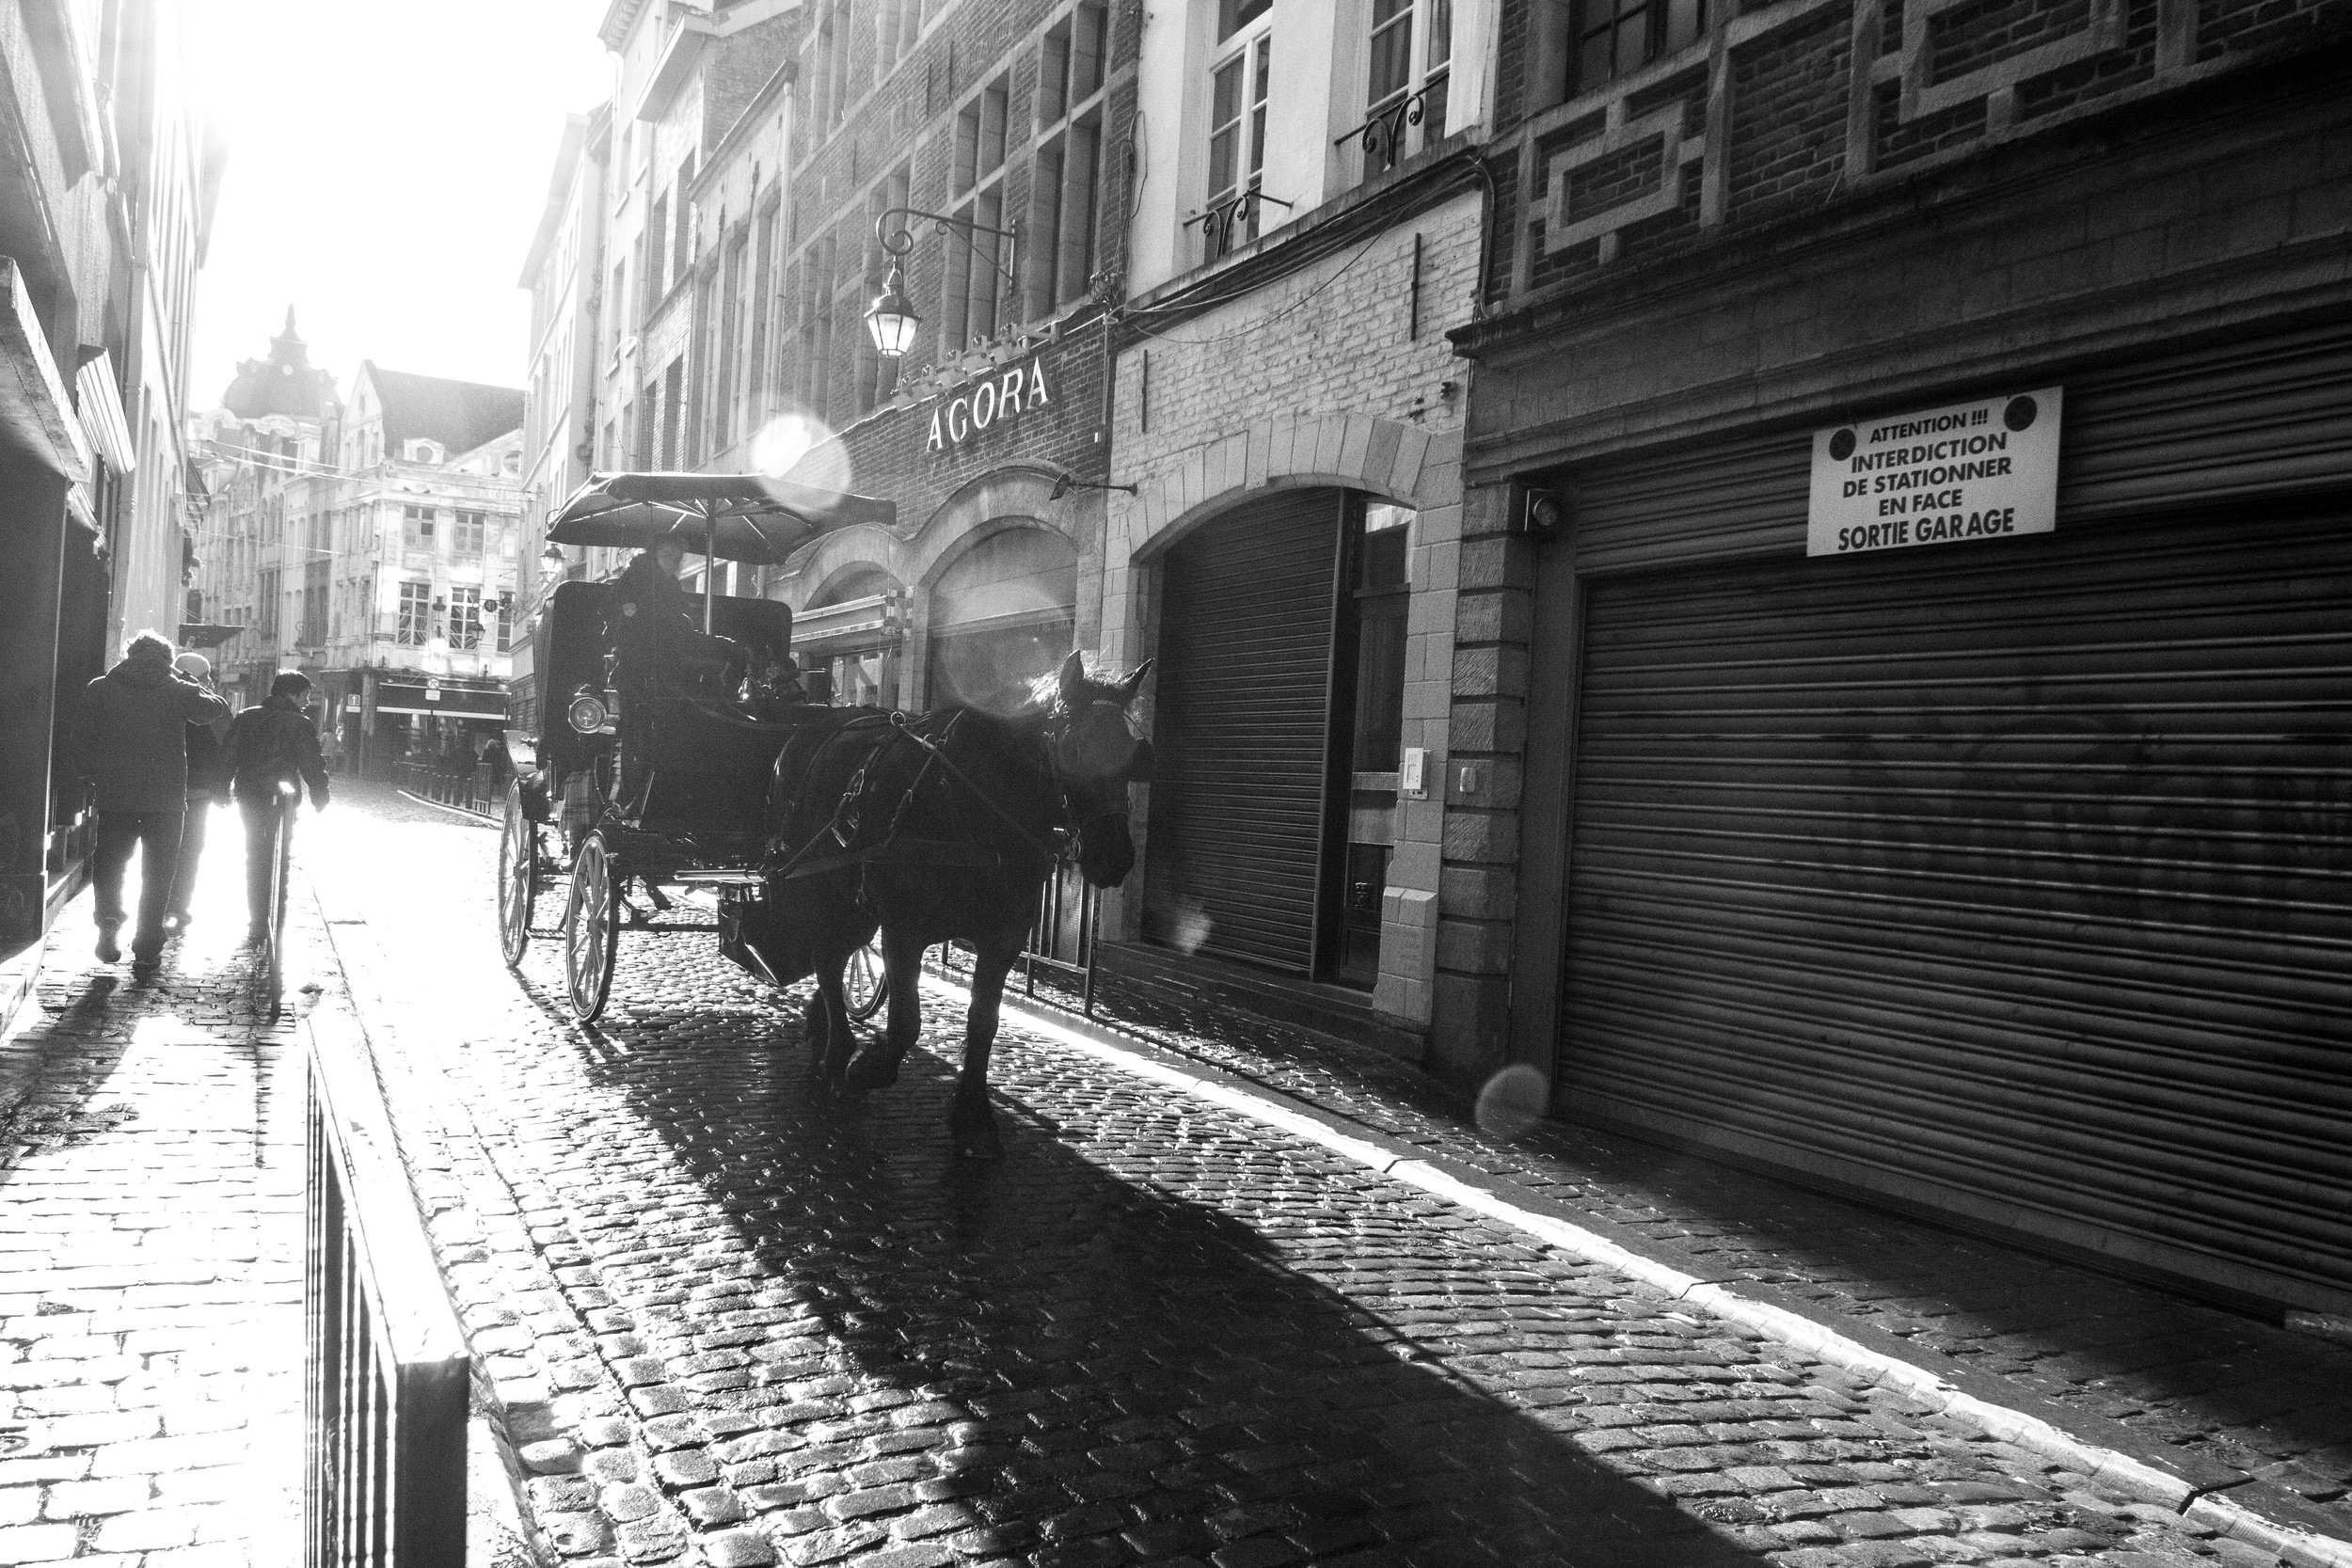 Carriages